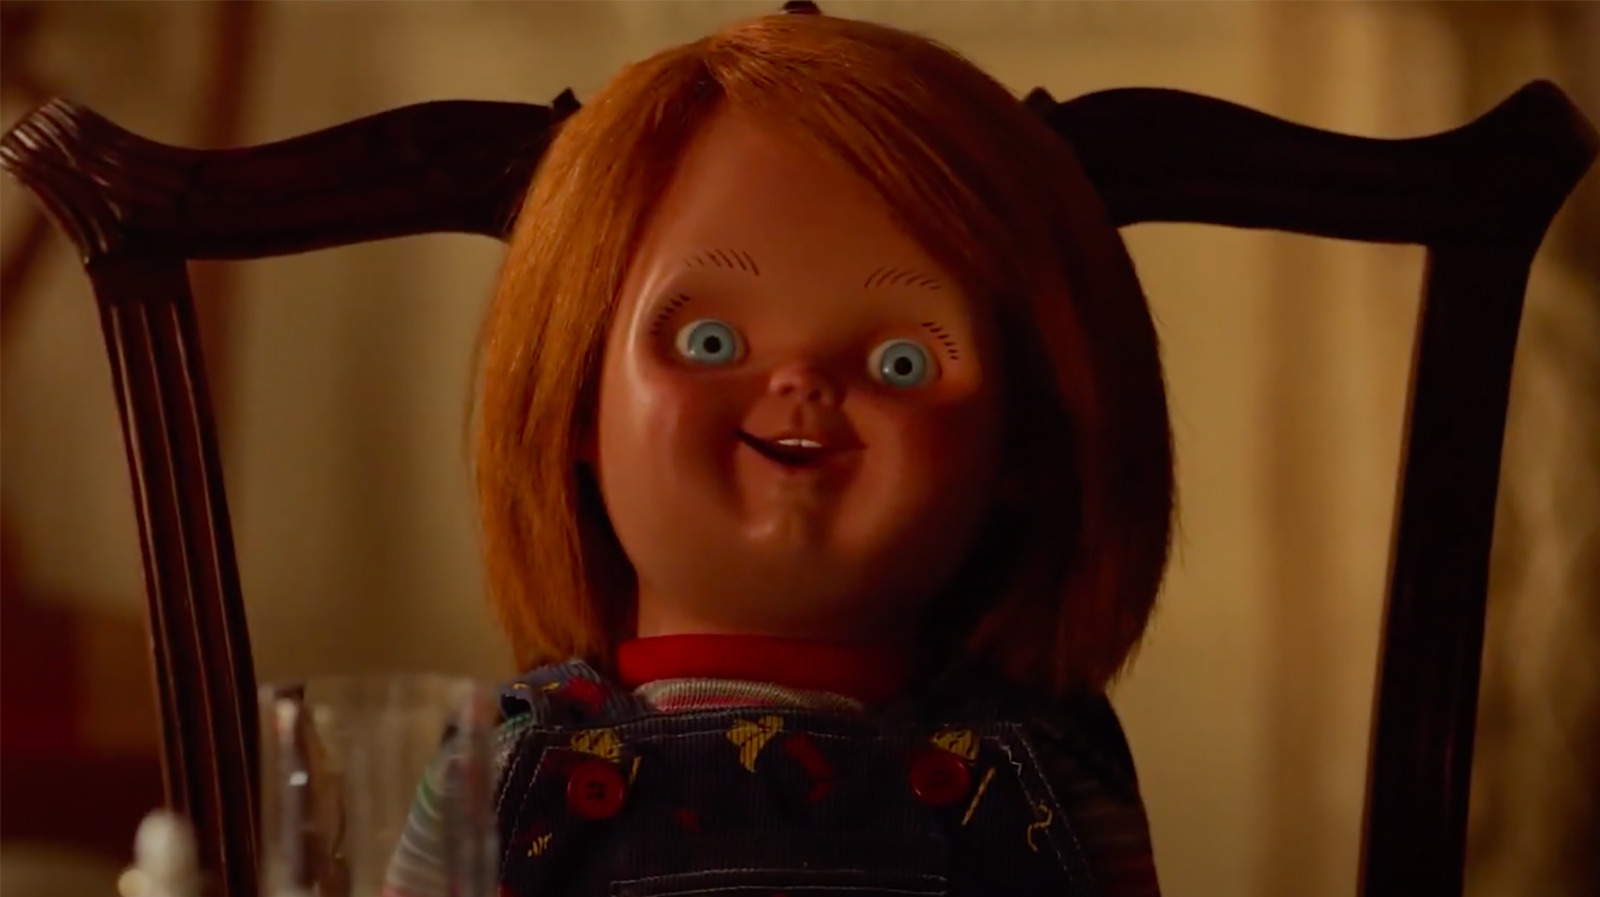 Everyone’s Favorite Killer Doll Heads To The White House In The Chucky Season 3 Trailer